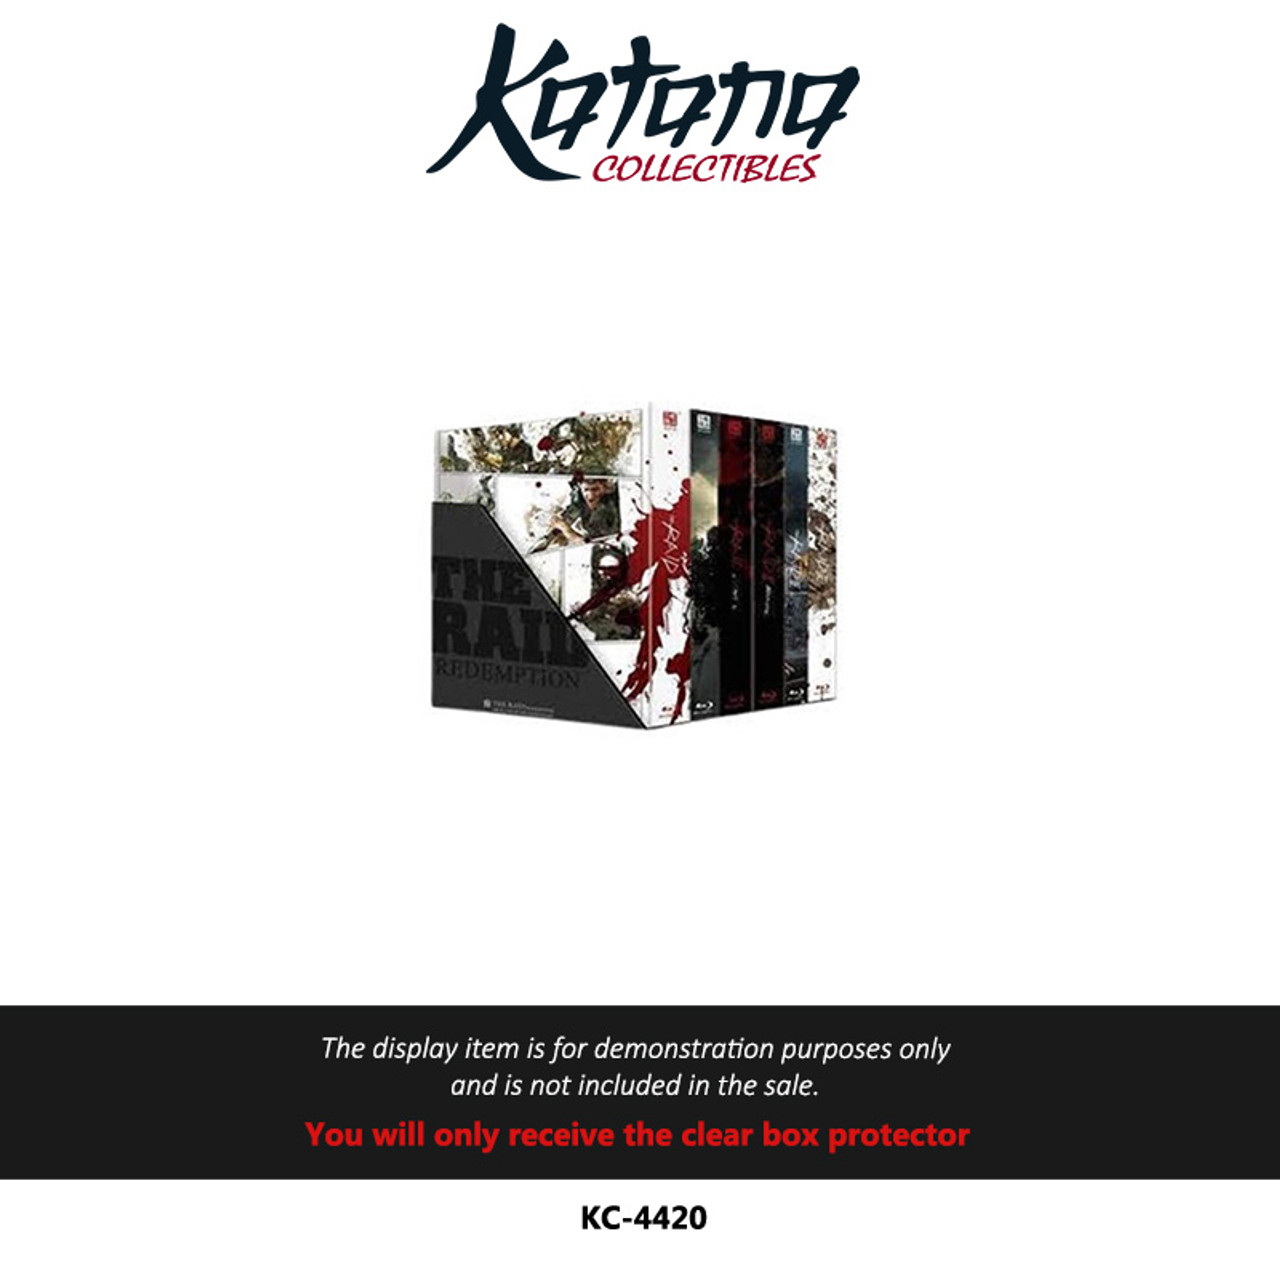 Katana Collectibles Protector For The Raid Redemption/ The Raid 2 Berandal Blu-Ray Exclusive Steelbook